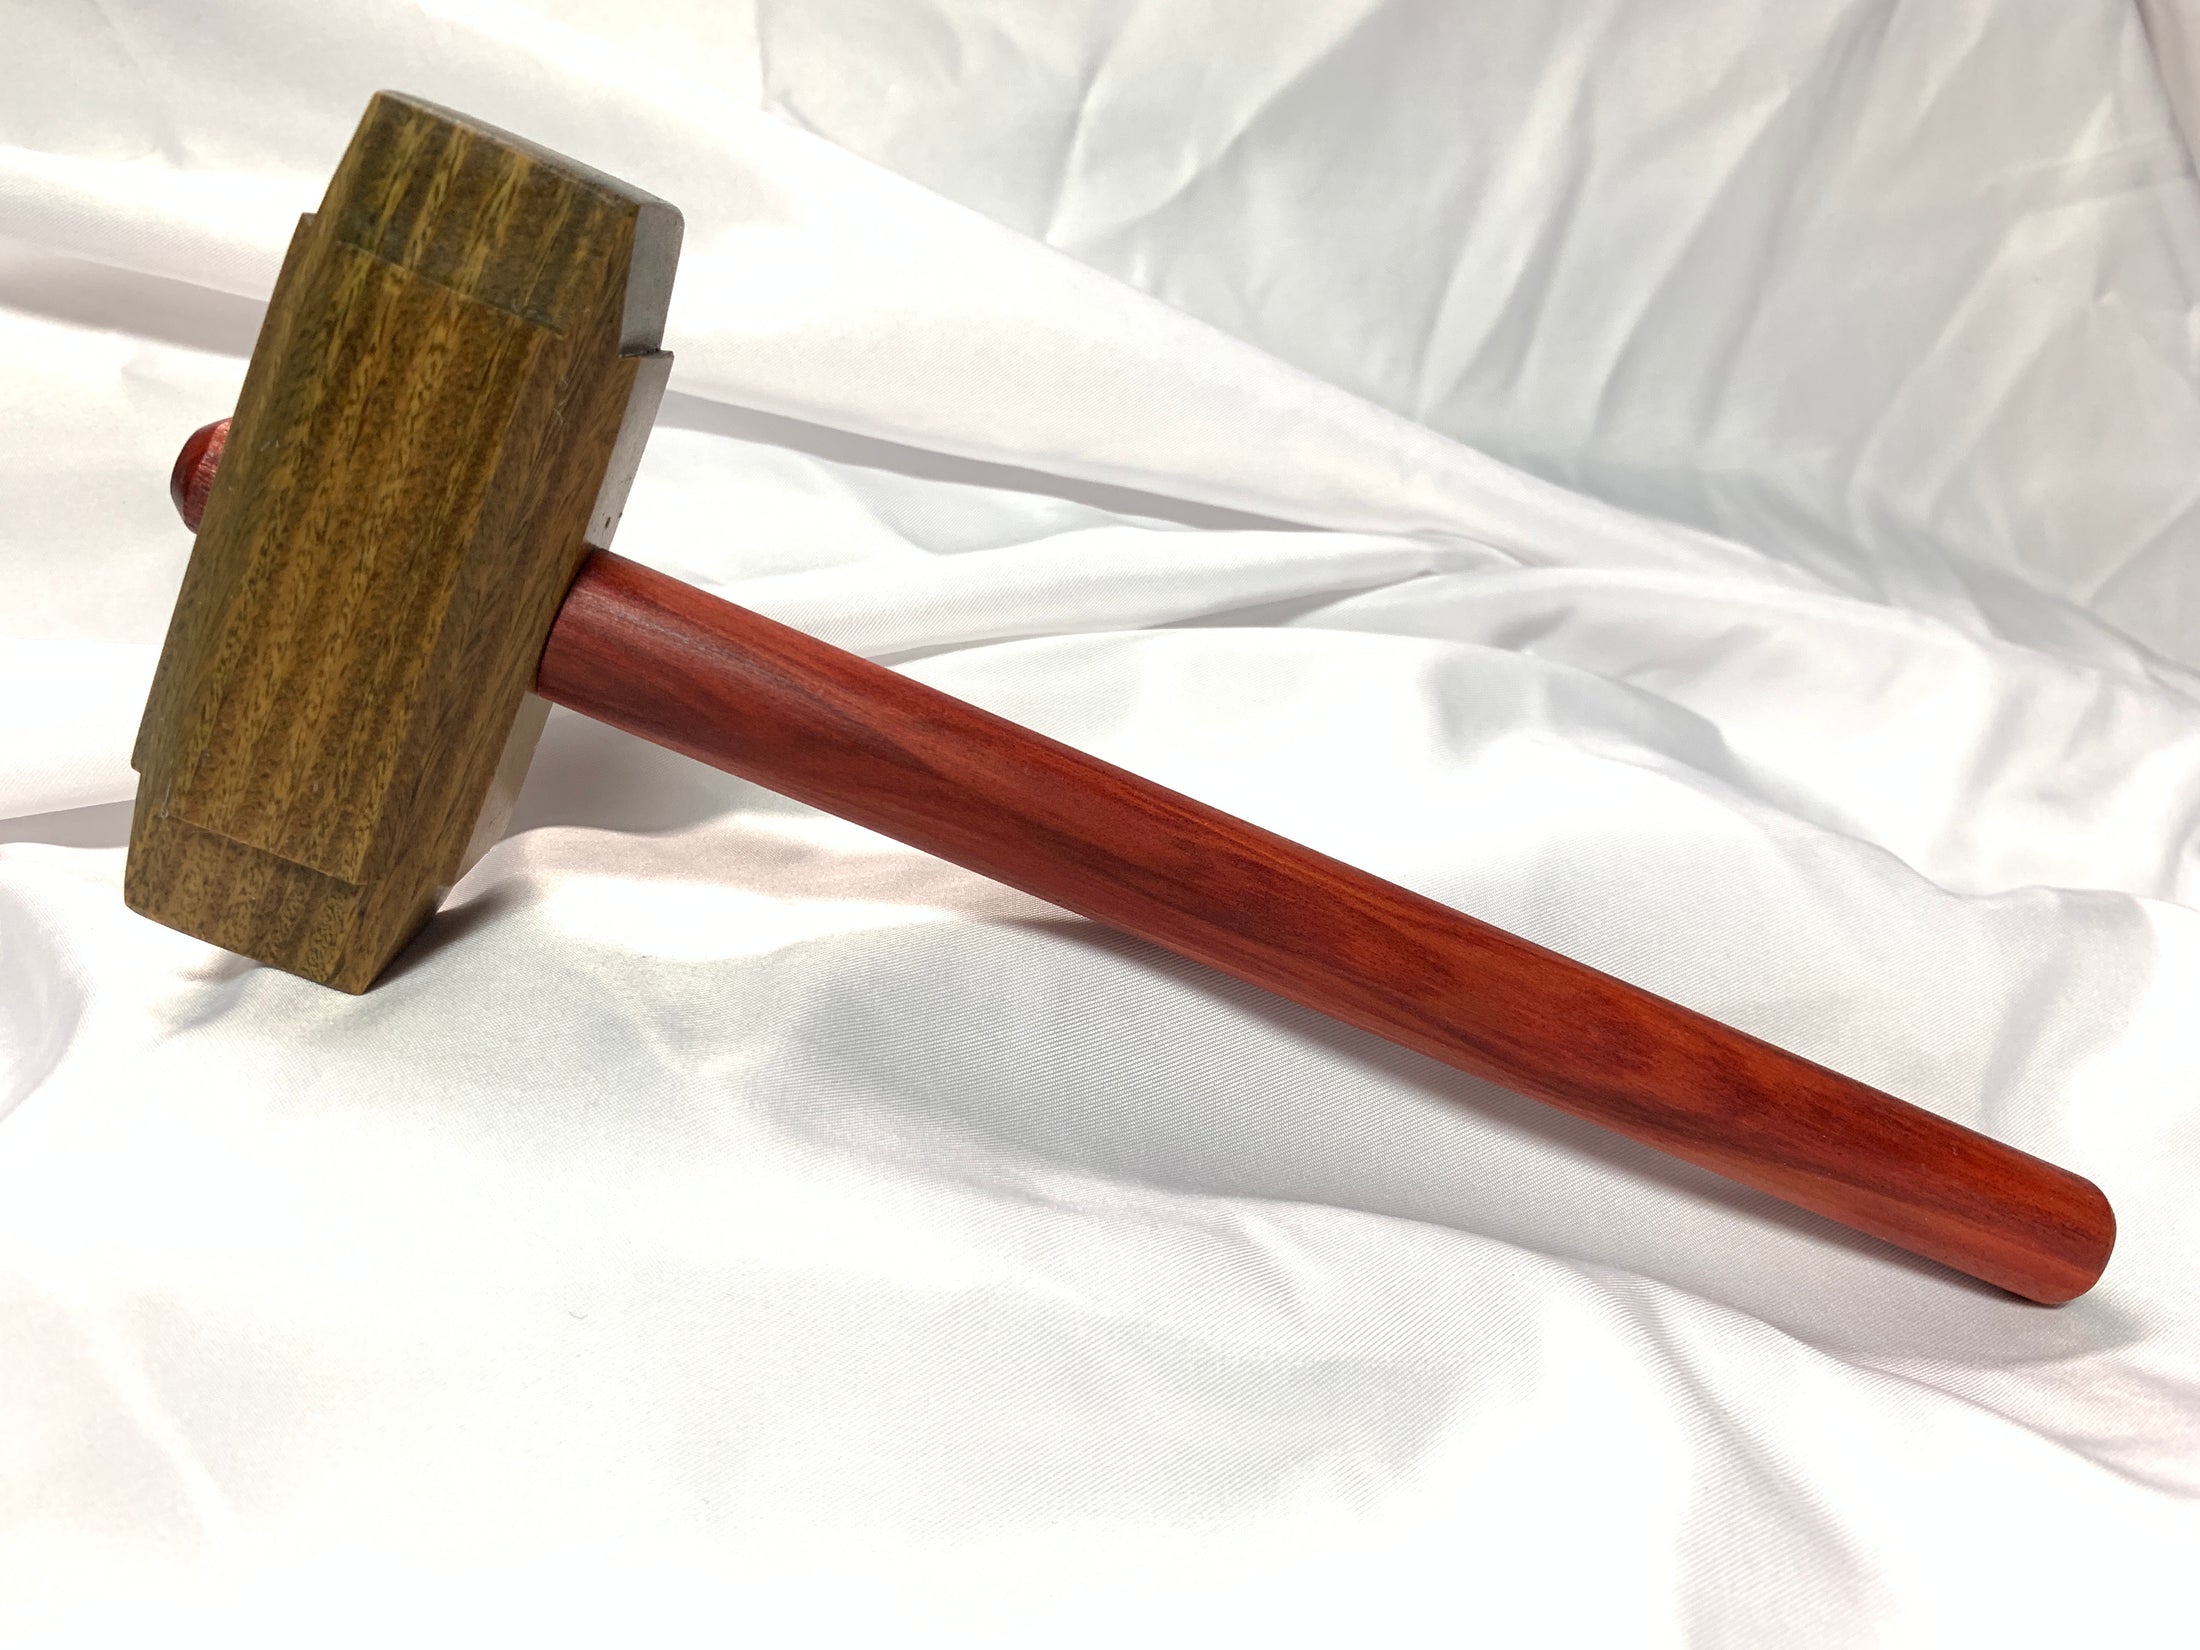 Thors Hammer Woodworking Mallet Lignum Vitae Head with Redheart Handle Kings Fine Woodworking